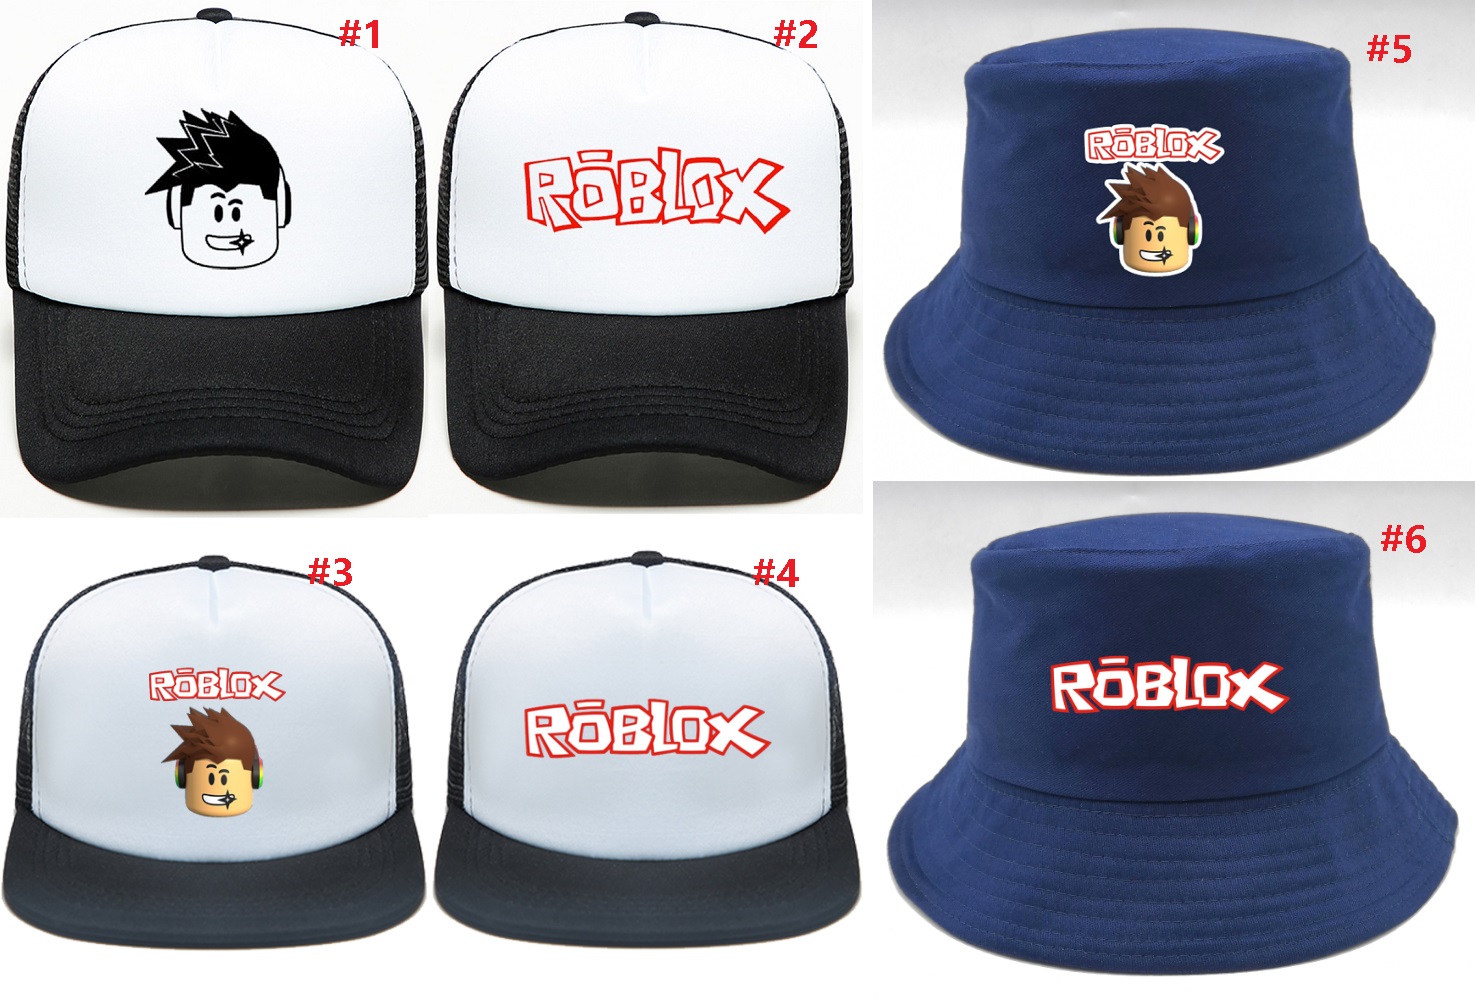 Roblox Baseball Kasket Coupon Code 171b0 3dd5a - roblox bags shopee philippines